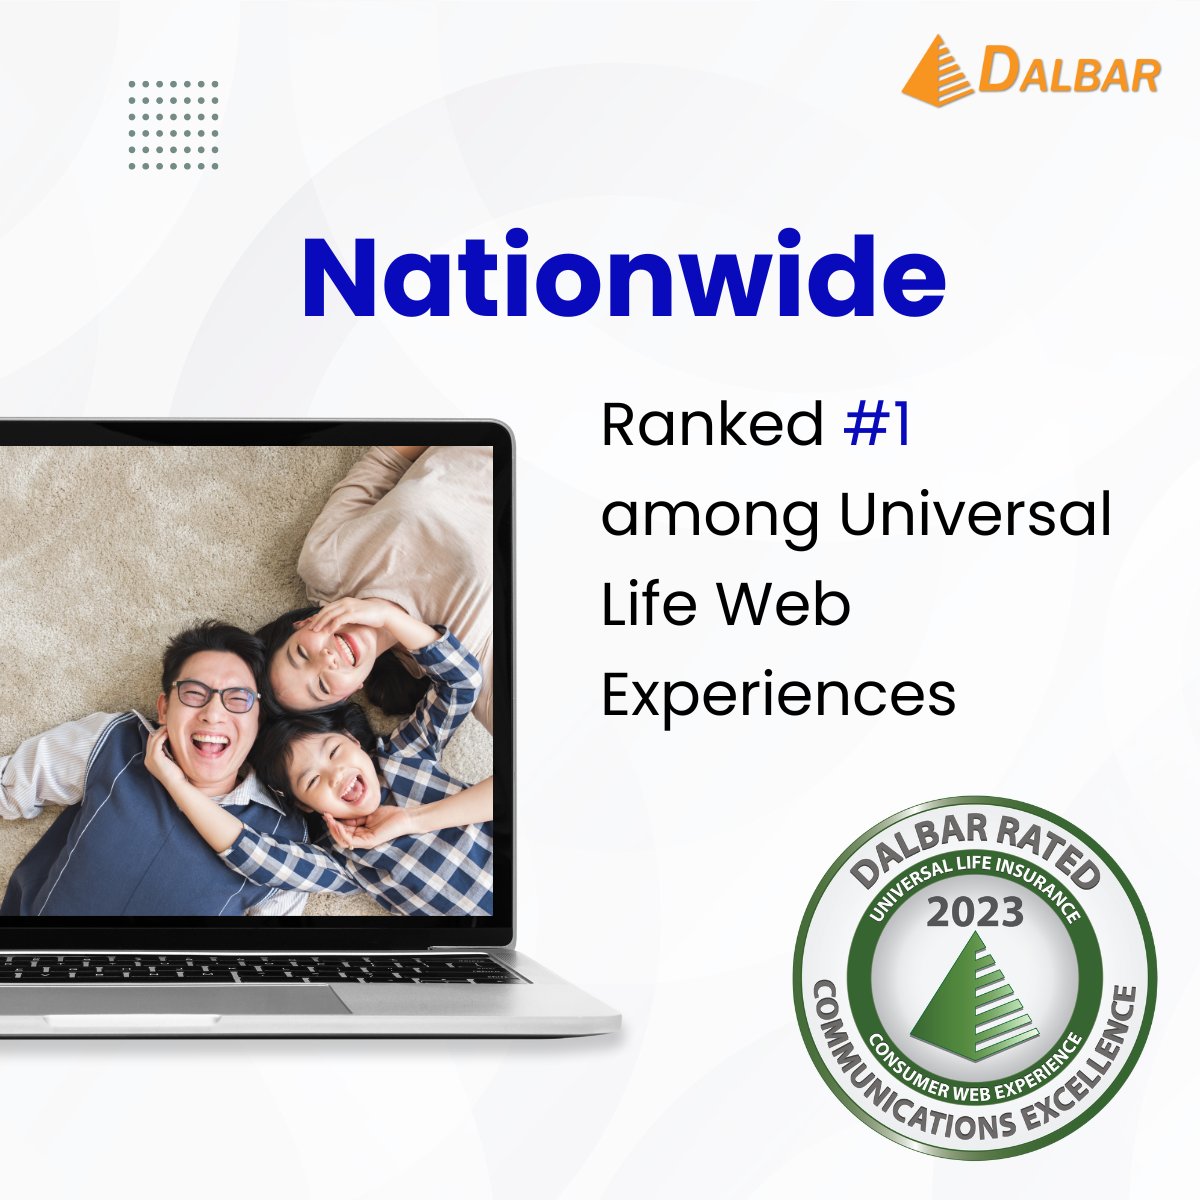 Congratulations to @Nationwide for having the top ranked Universal Life Insurance website and and earning the 2023 Communications Excellence Seal for Universal Life Consumer Web Experience for best-in-class service! #lifeinsurance #onlineexperience #customerservice #dalbar